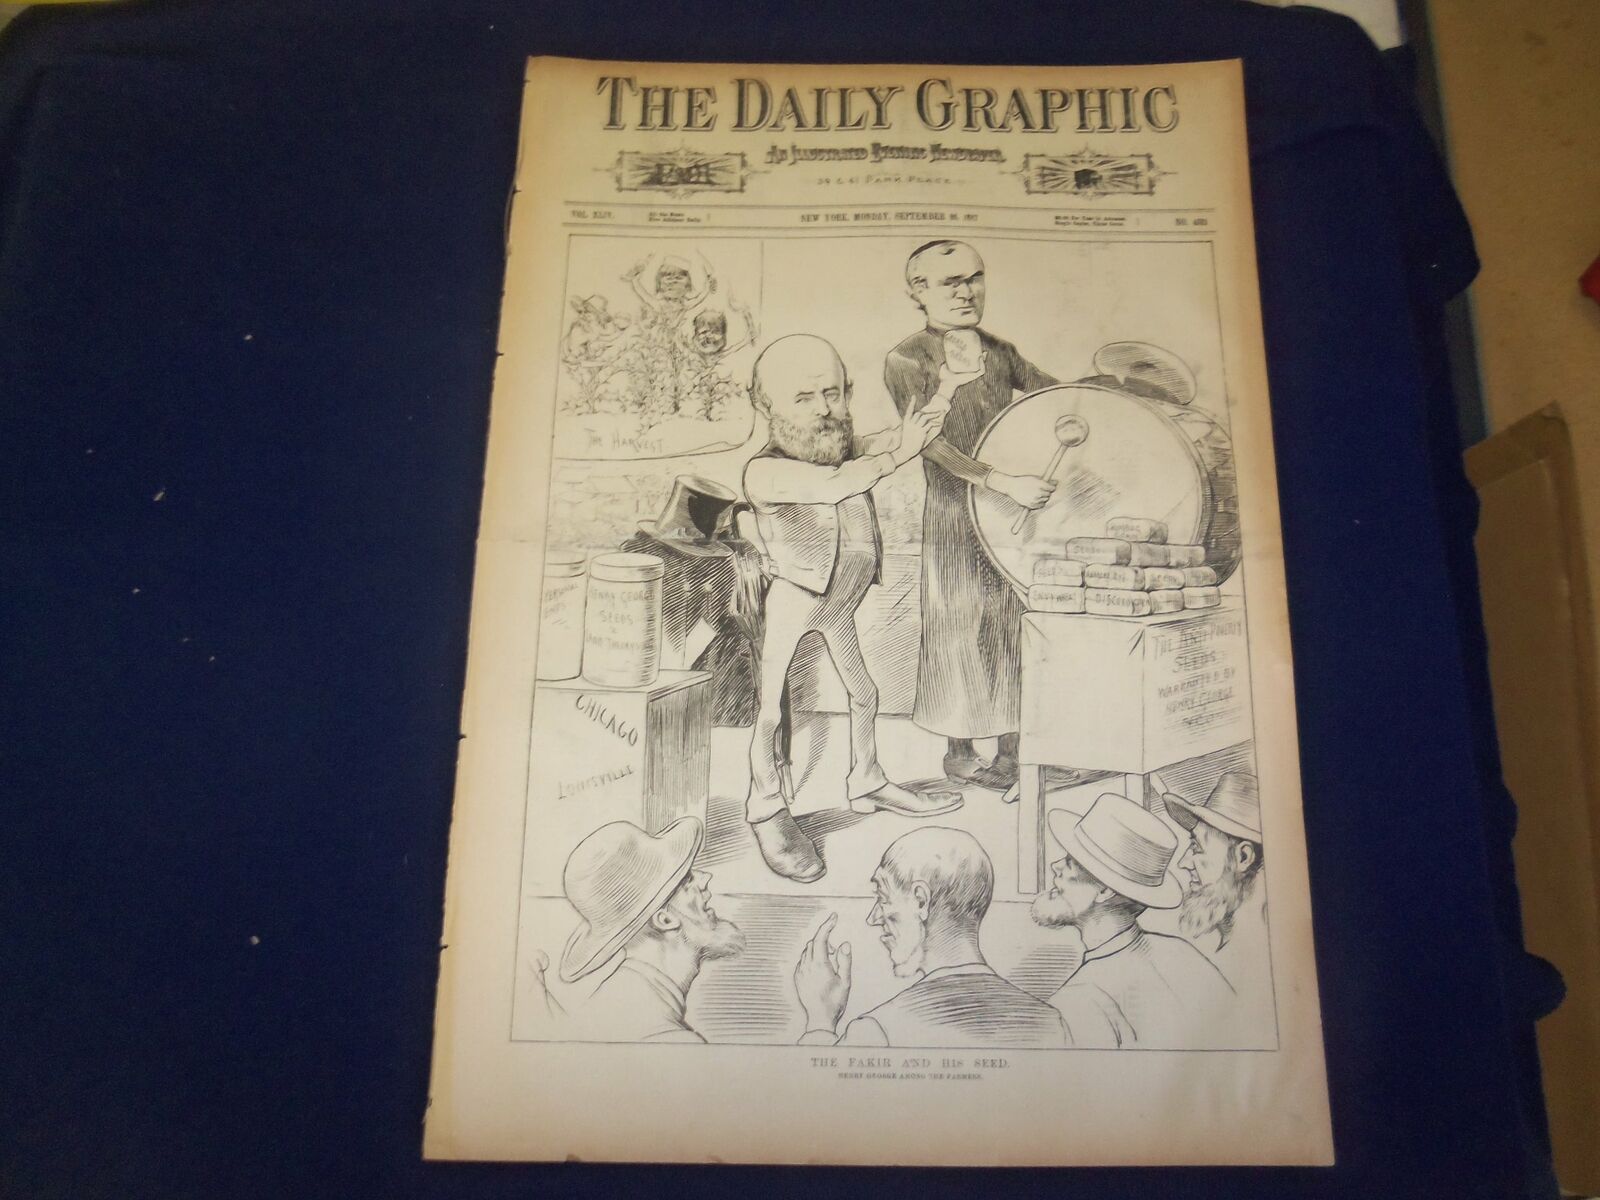 1887 SEPTEMBER 26 THE DAILY GRAPHIC NEWSPAPER - THE FAKIR AND HIS SEED - NT 7661